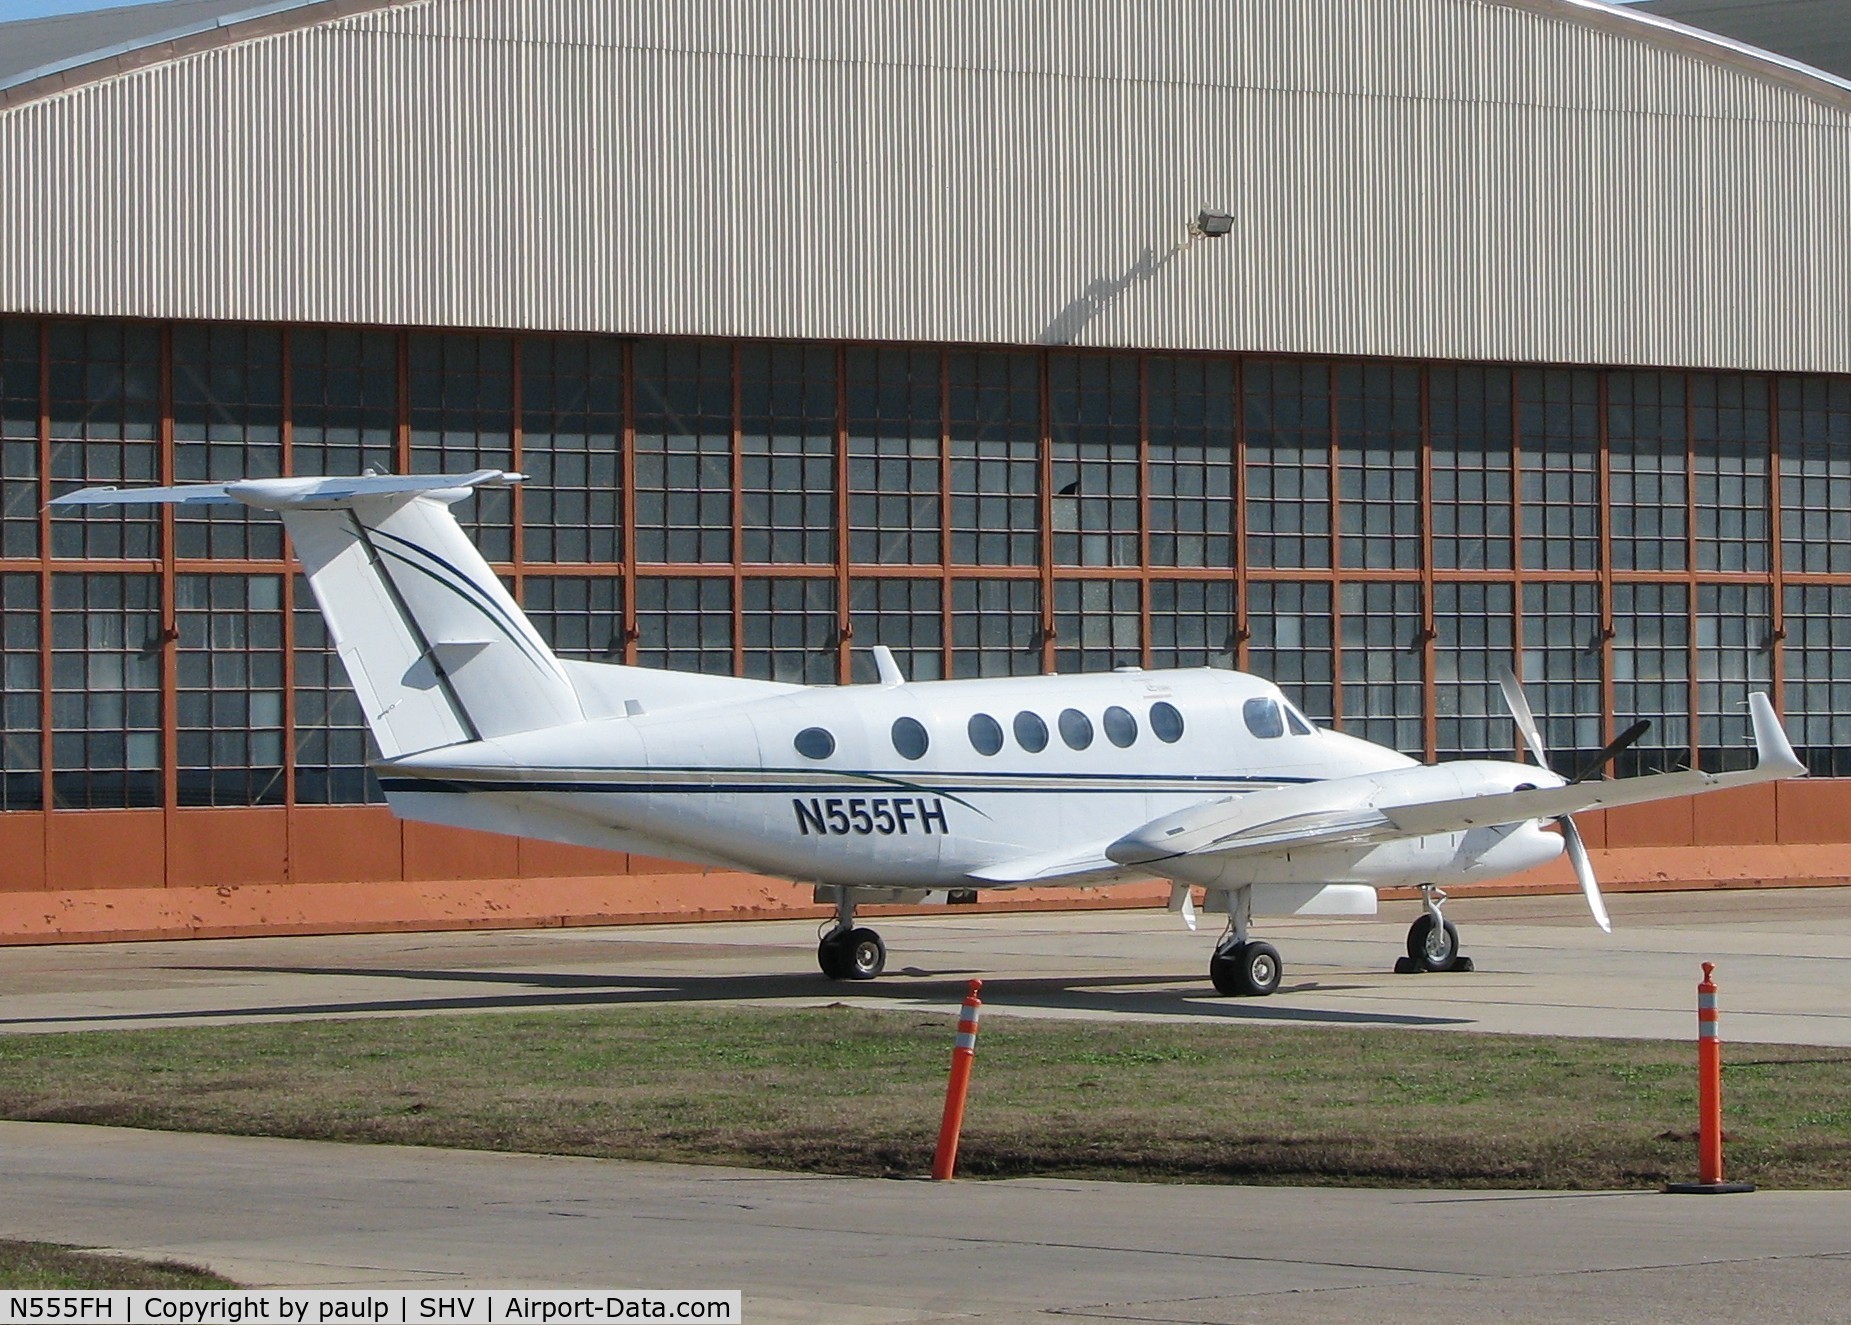 N555FH, 1990 Beech 300 C/N FA-213, Parked at the Shreveport Regional airport.